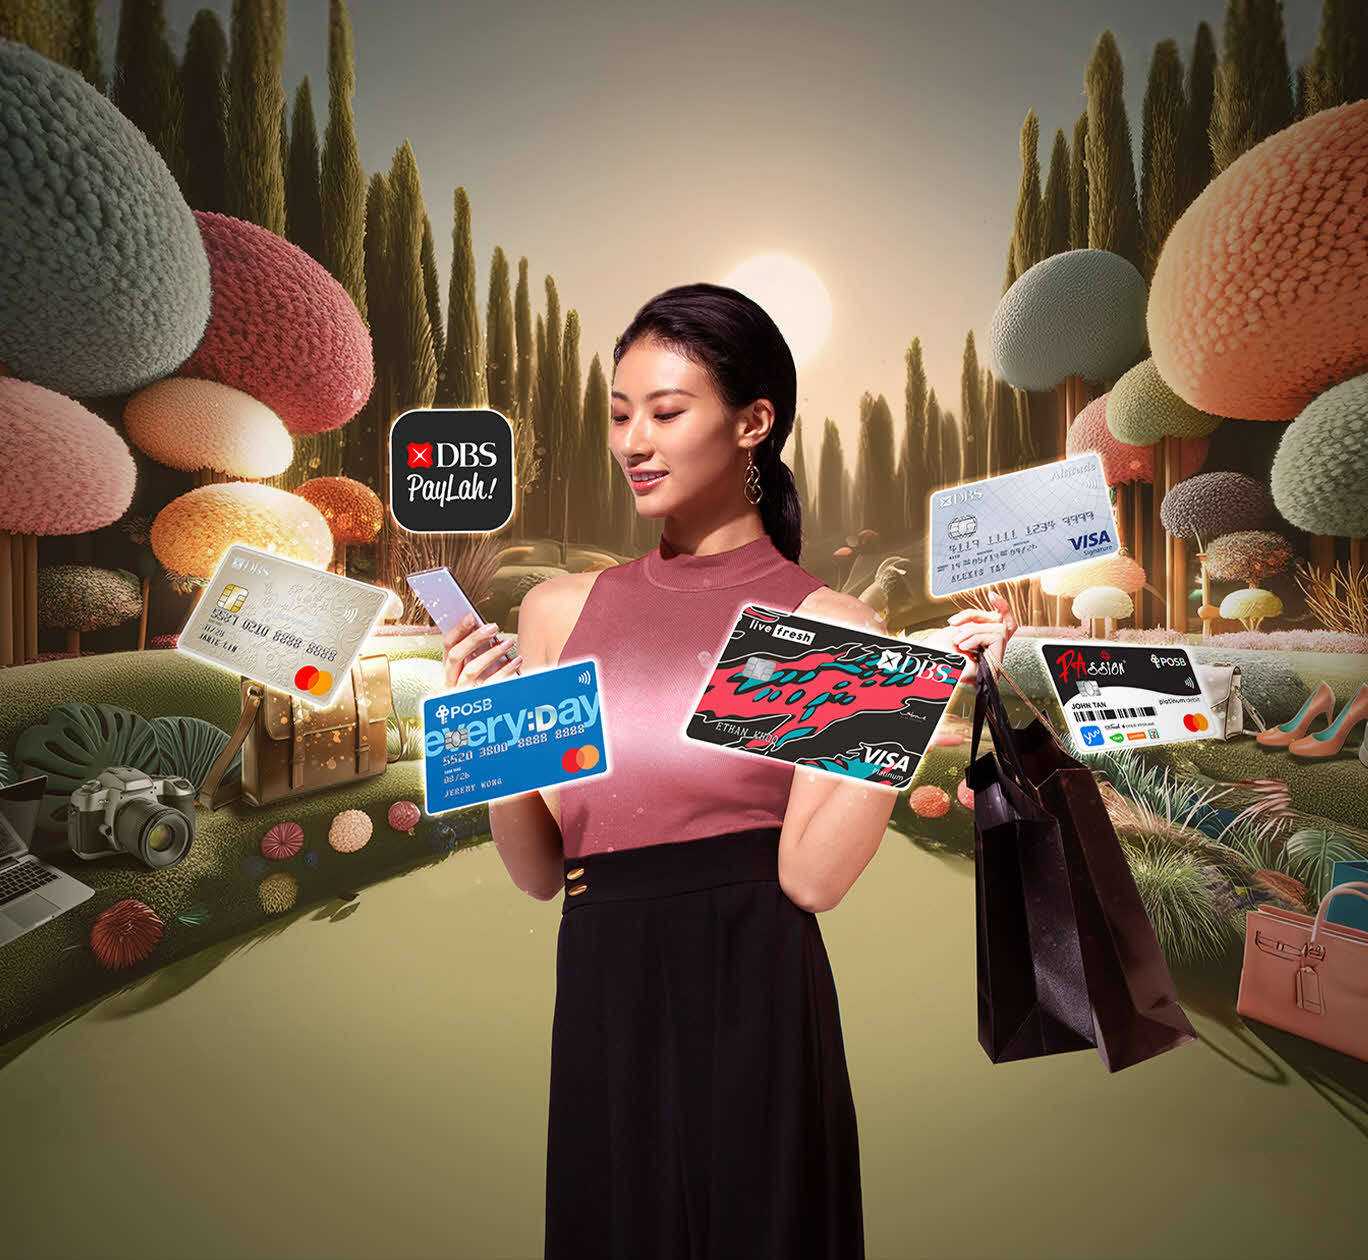 It’s a Shopper’s Wonderland. Enjoy up to S$132 off! Every spend is a big deal with DBS/POSB Cards and PayLah!